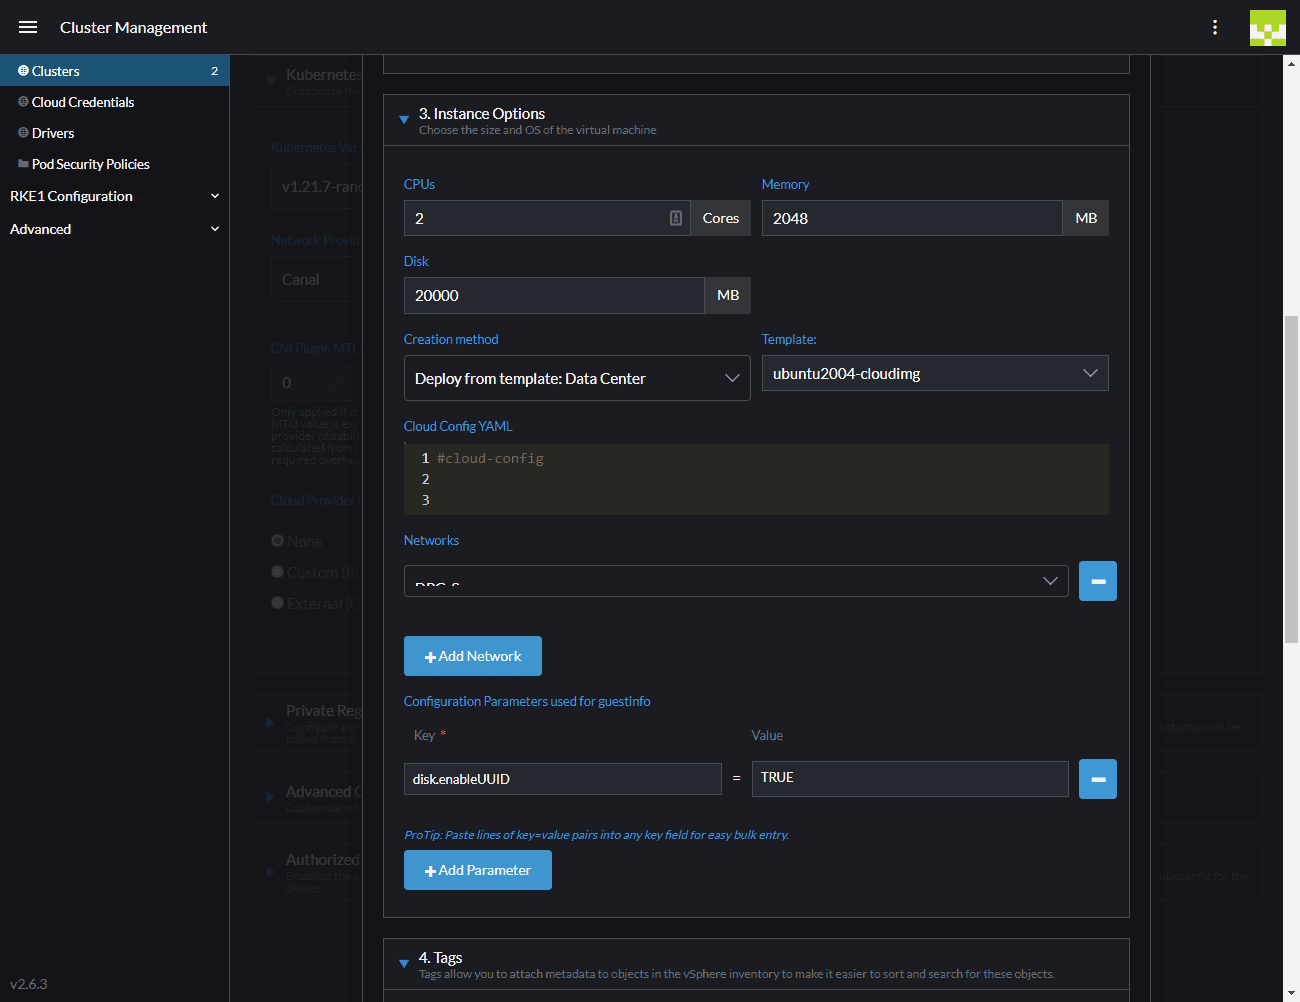 Configuring the instance options for the node template settings